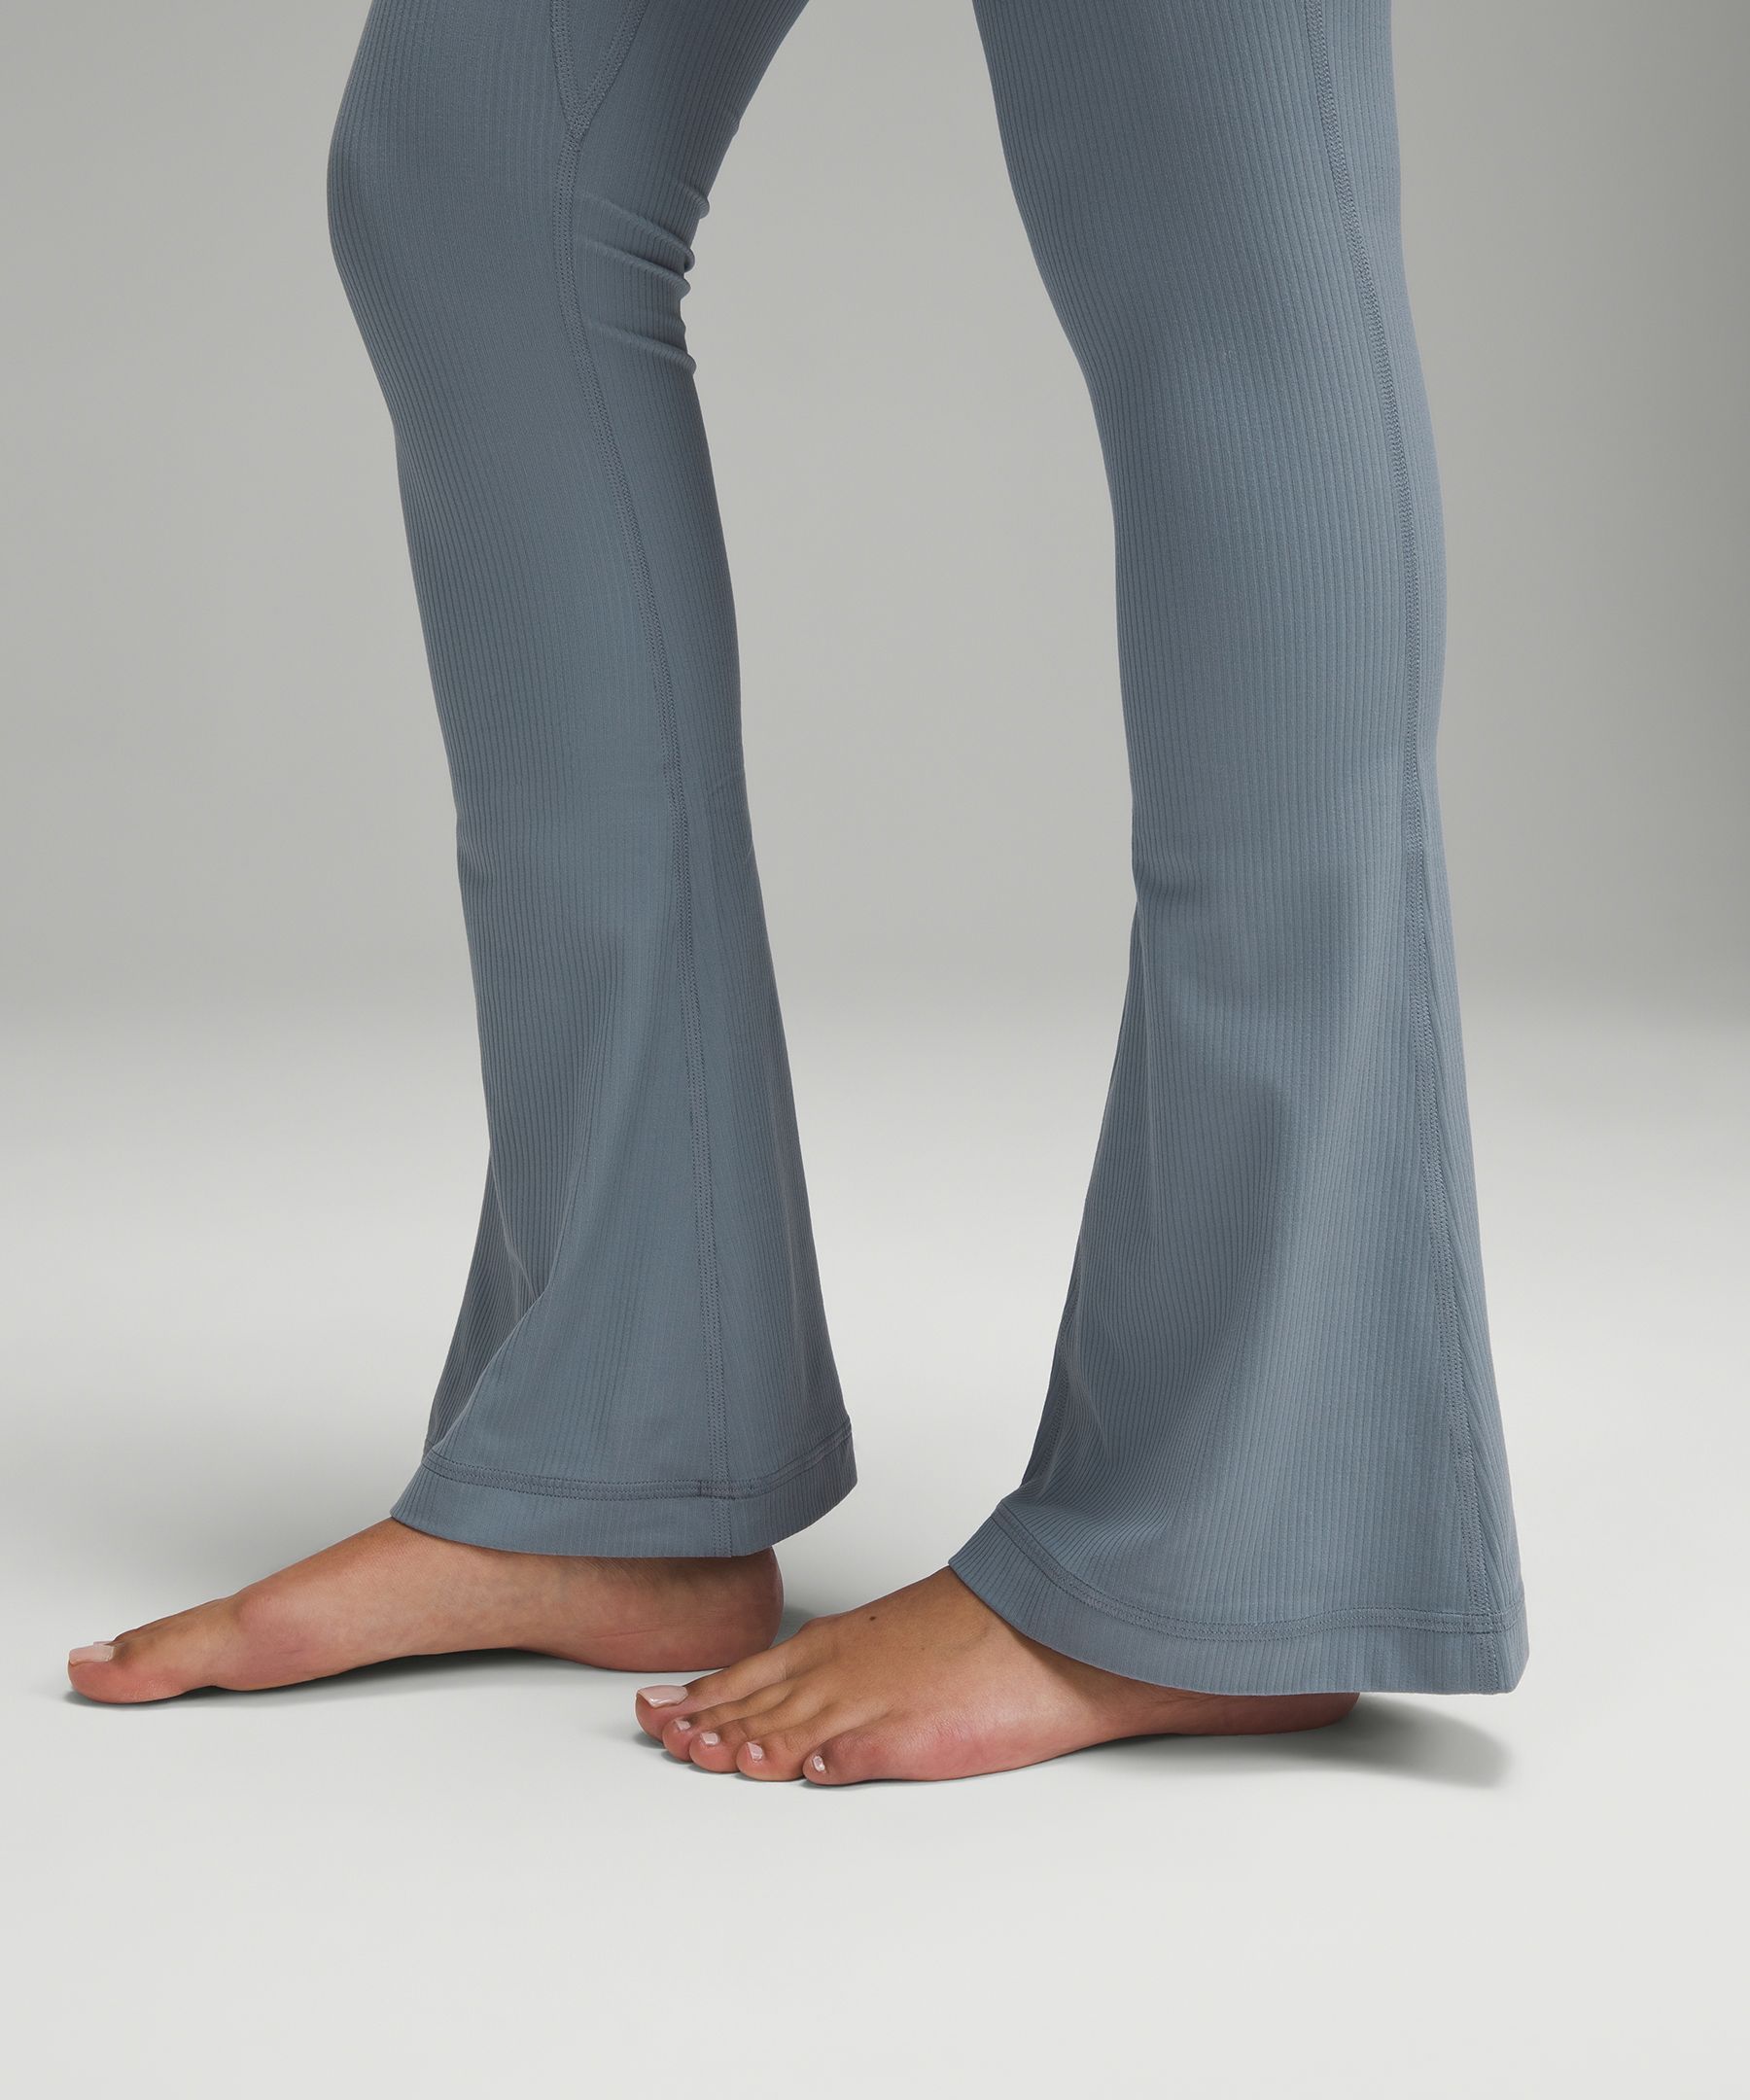 Girlies you better run to @lululemon and get the align mini flares imm